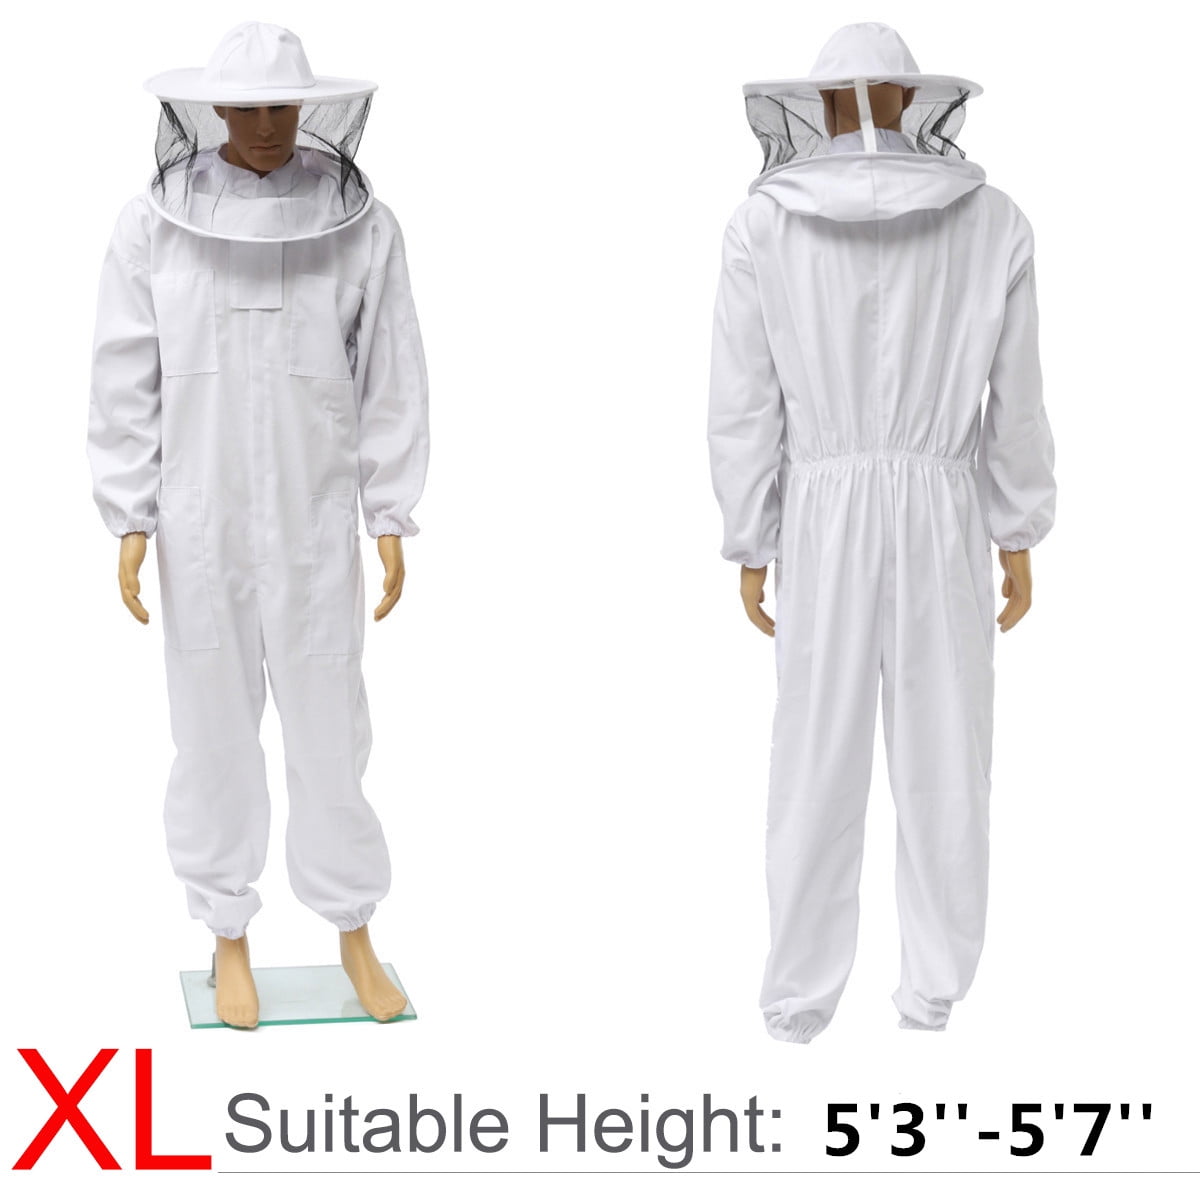 Olive Green Full Body Beekeeping Suits Coverall Jacket Outfit Protective Equipment Bee Keeping Supplies Polycotton 260 GSM Bee Proof Suit BzBee Beekeepers Bee Suit